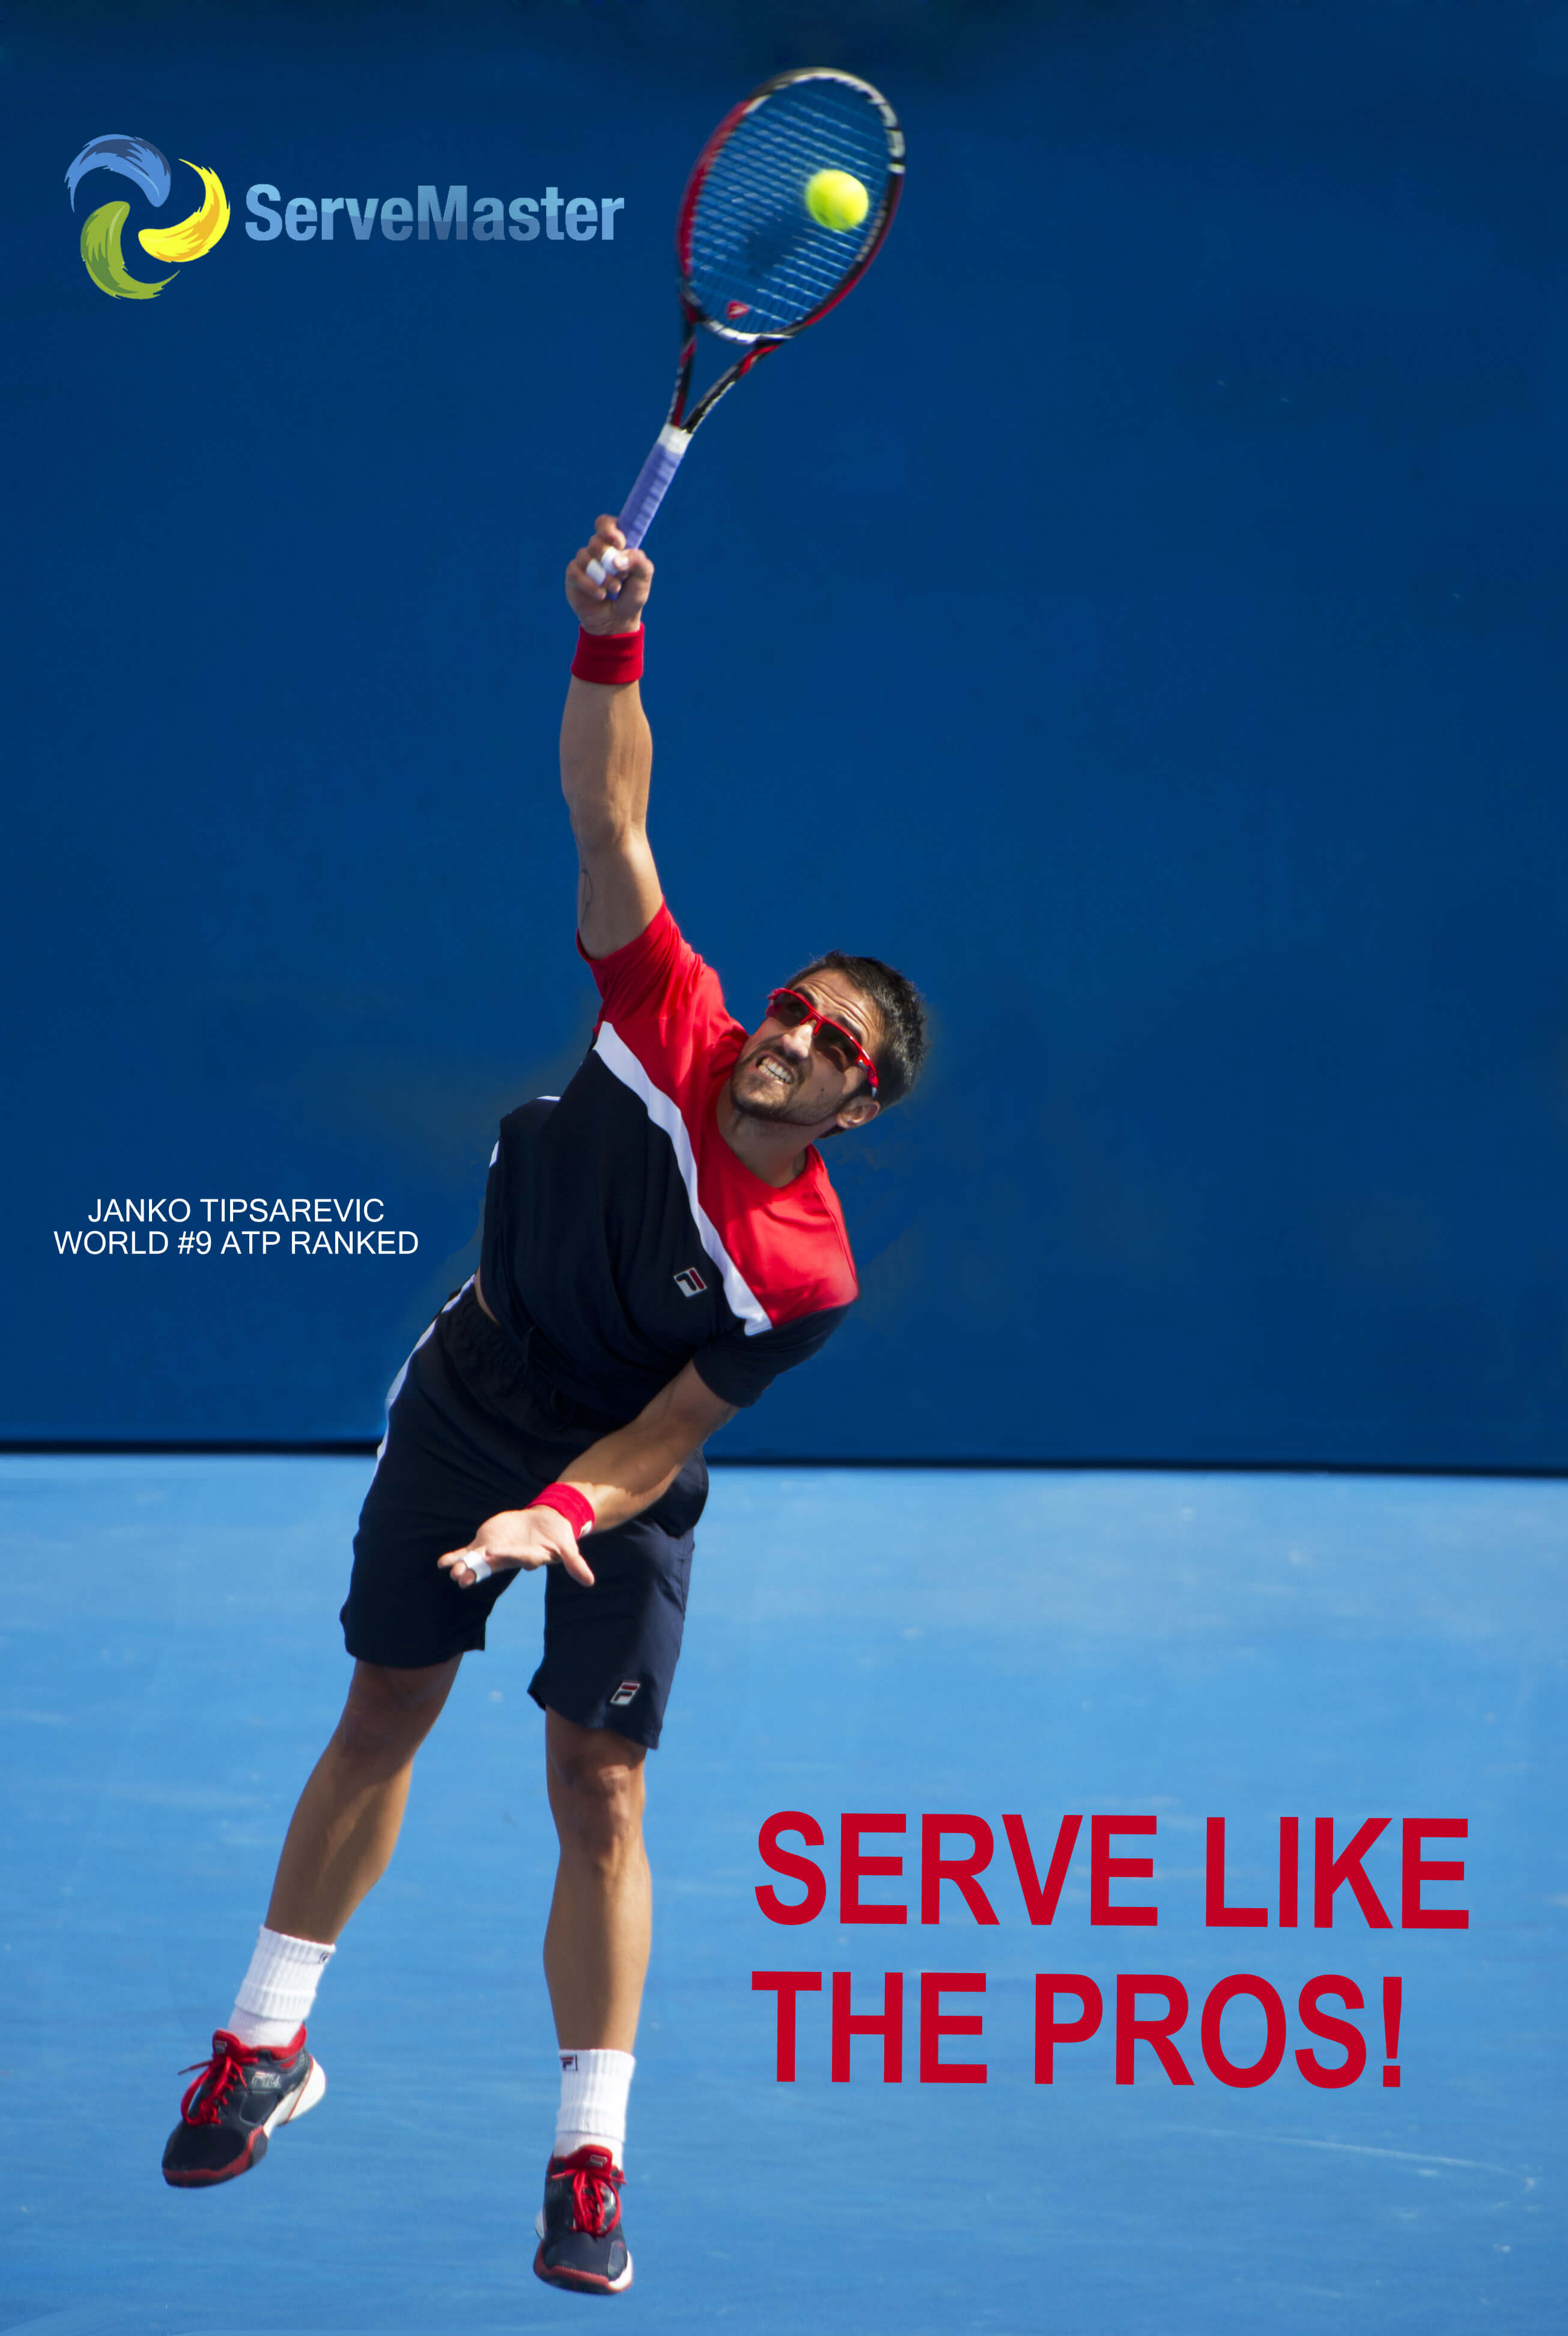 ServeMaster is the best tennis serve trainer for all ages